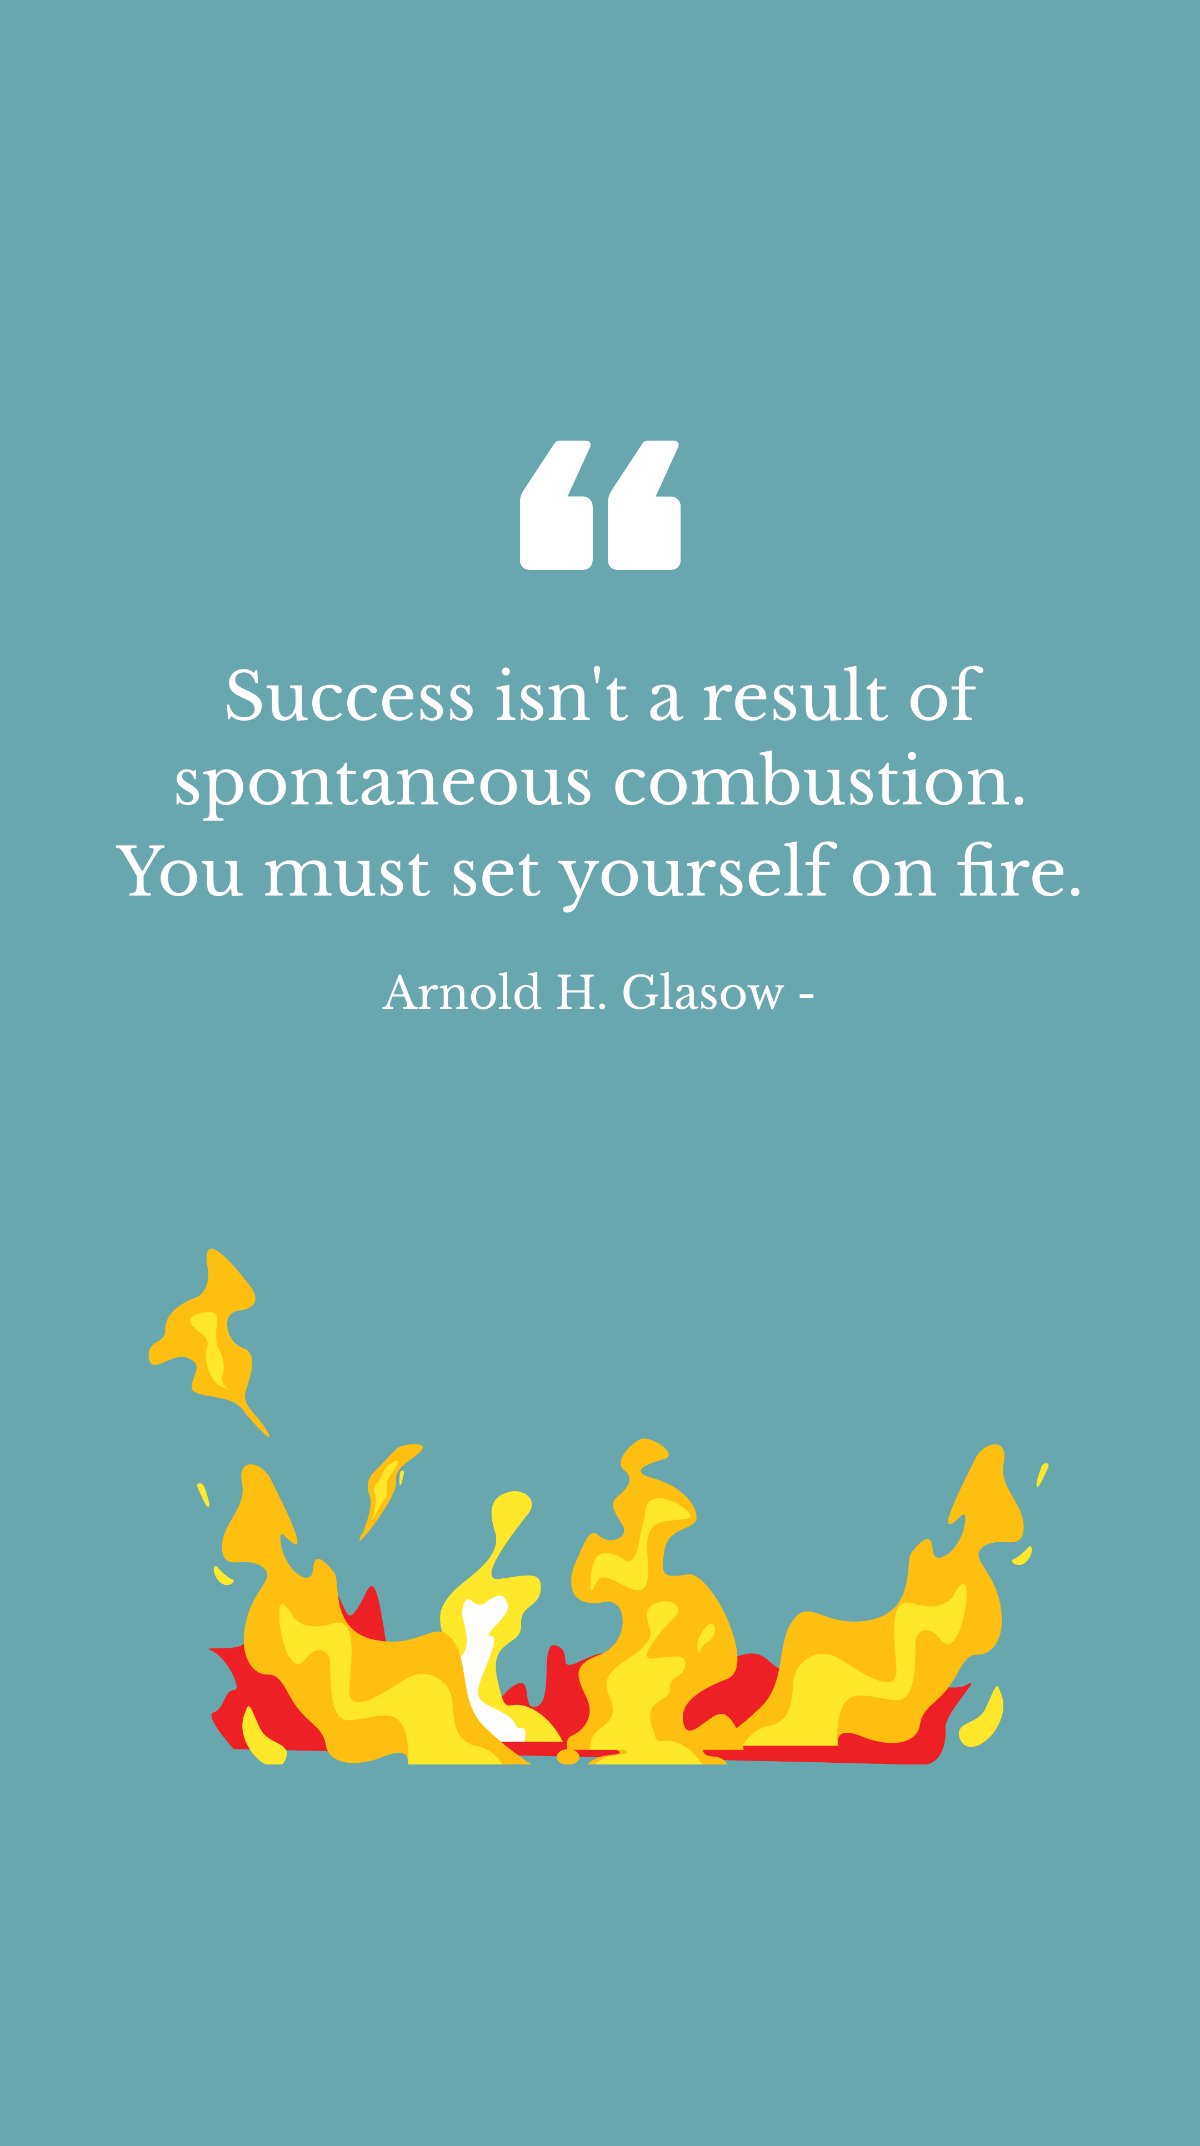 Arnold H. Glasow - Success isn't a result of spontaneous combustion. You must set yourself on fire. Template